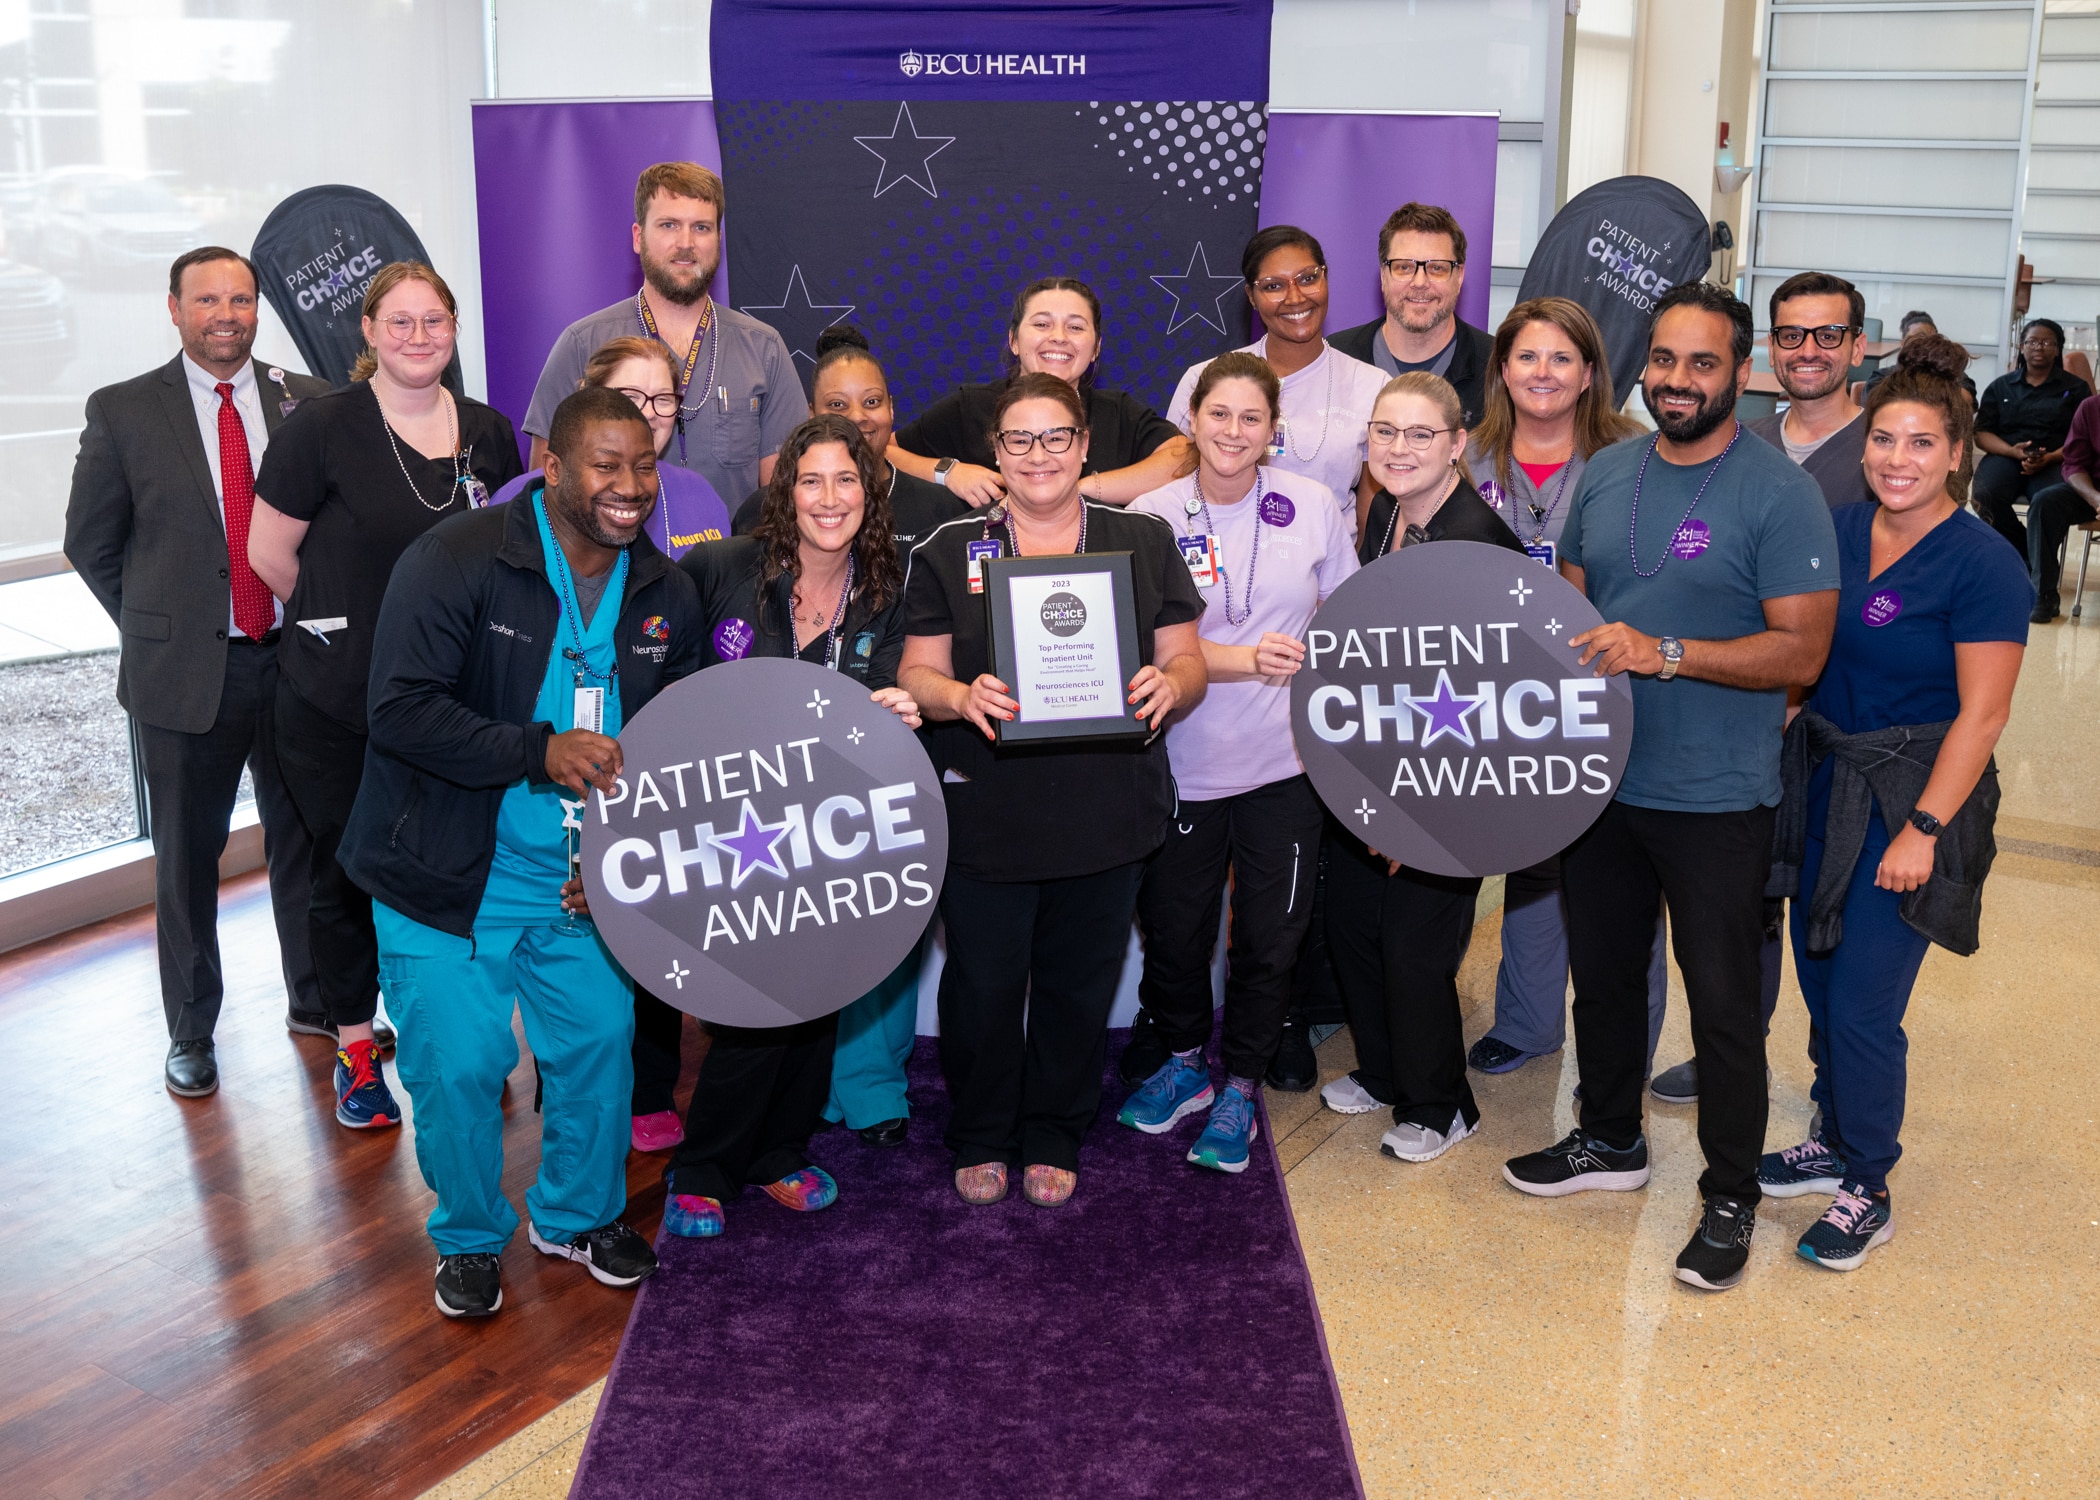 The ECU Health Medical Center Neurosciences ICU team gathers for a group photo to celebrate their Patient Choice Award.